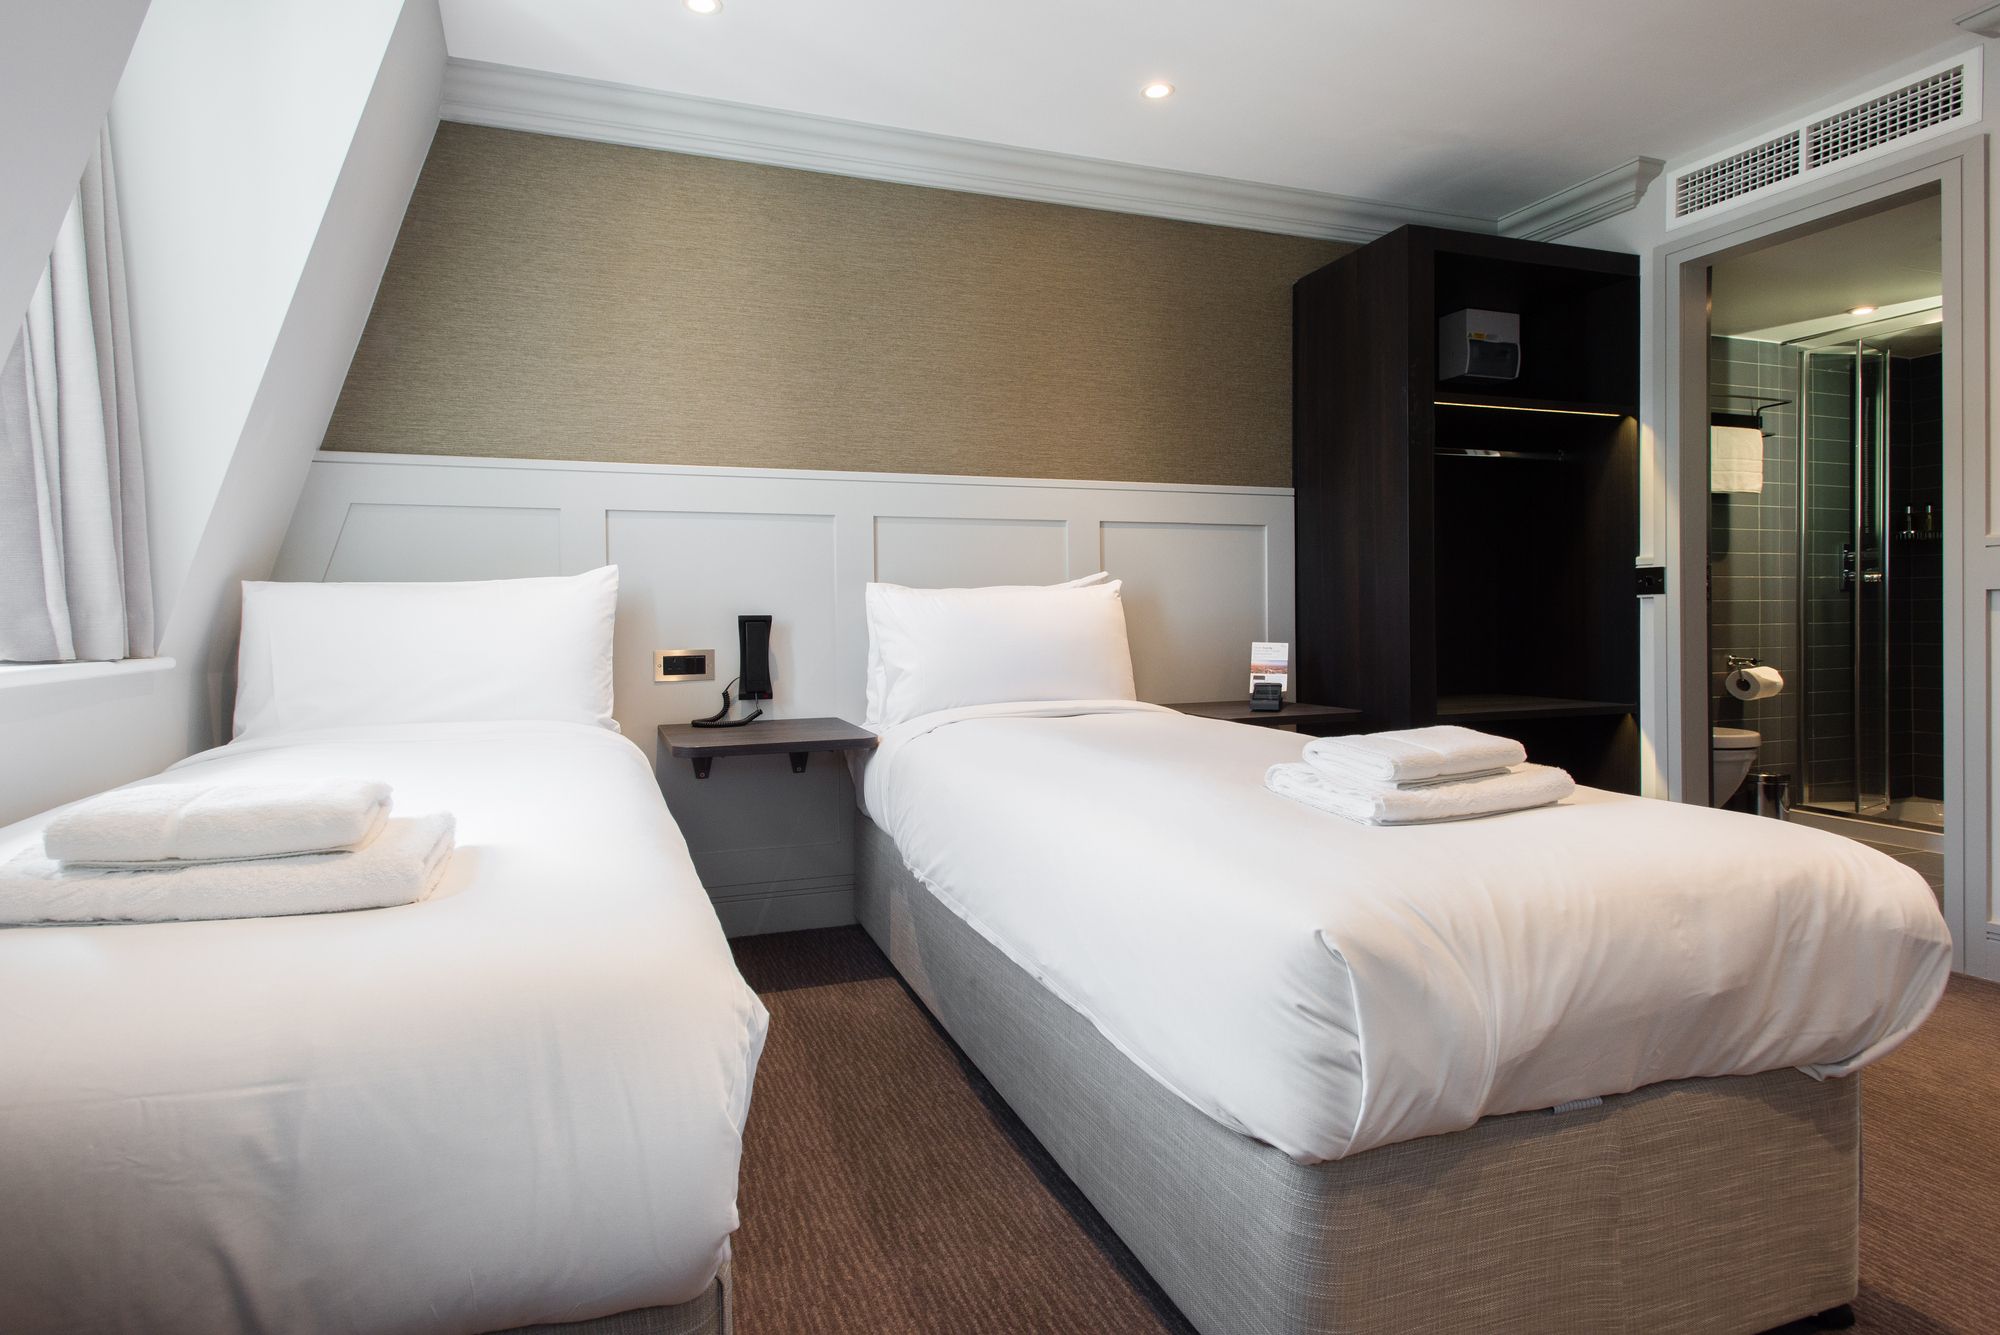 Searching for Twin Room Availability in London? Secure Your Stay at Mowbray Court Hotel!